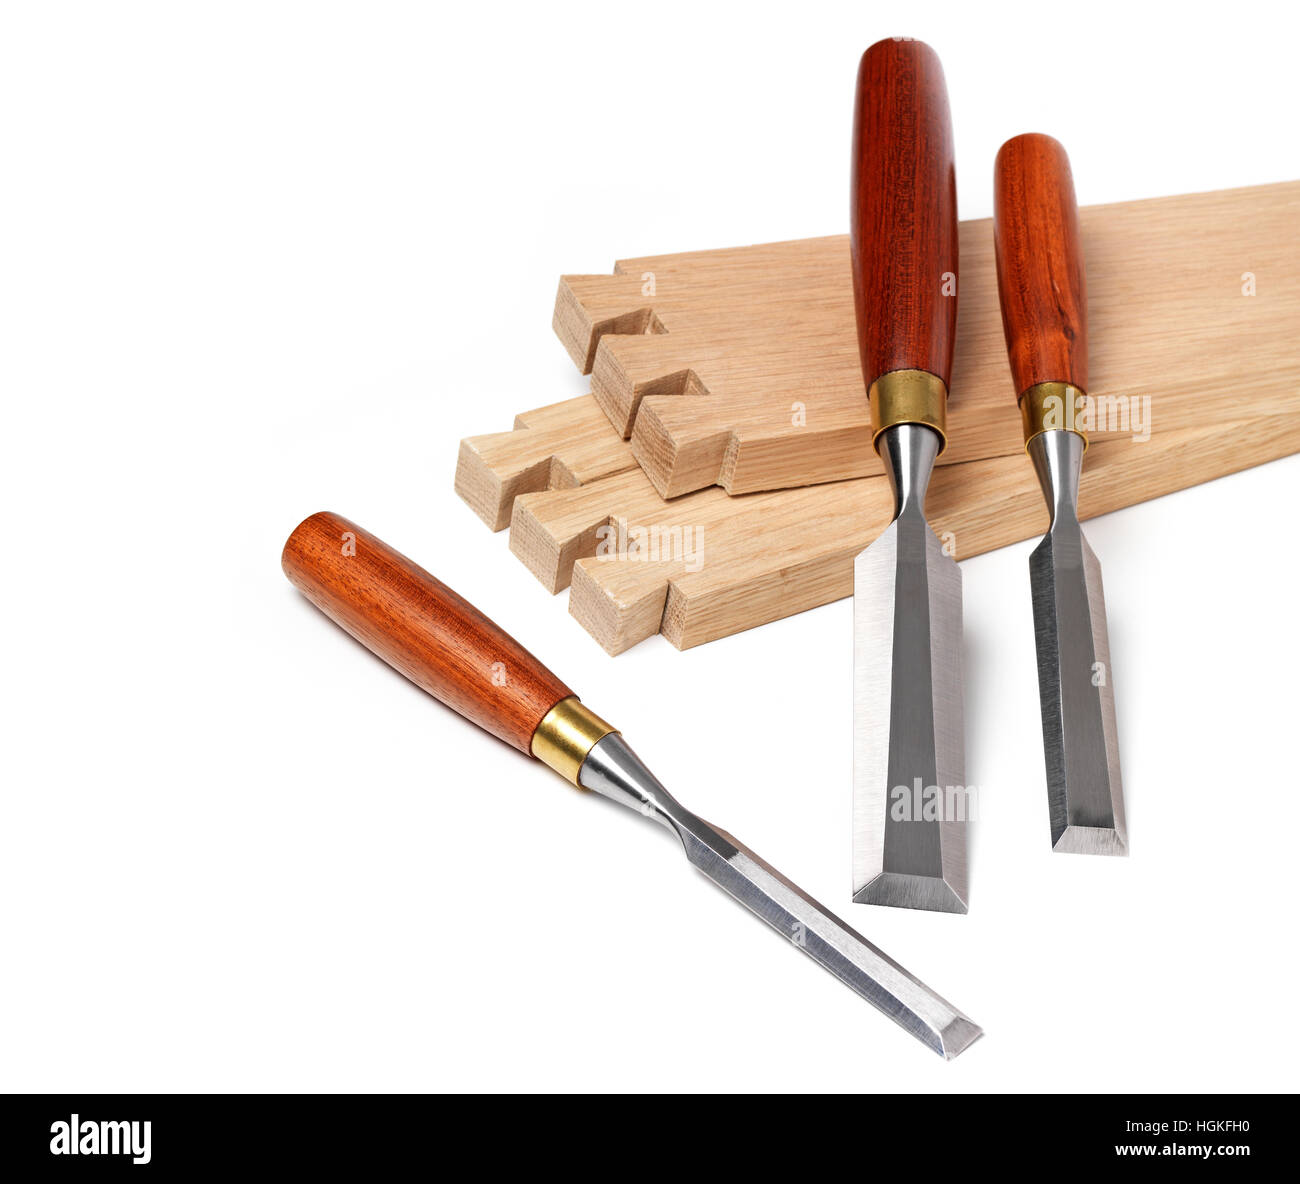 Chisel set and wood joint Stock Photo